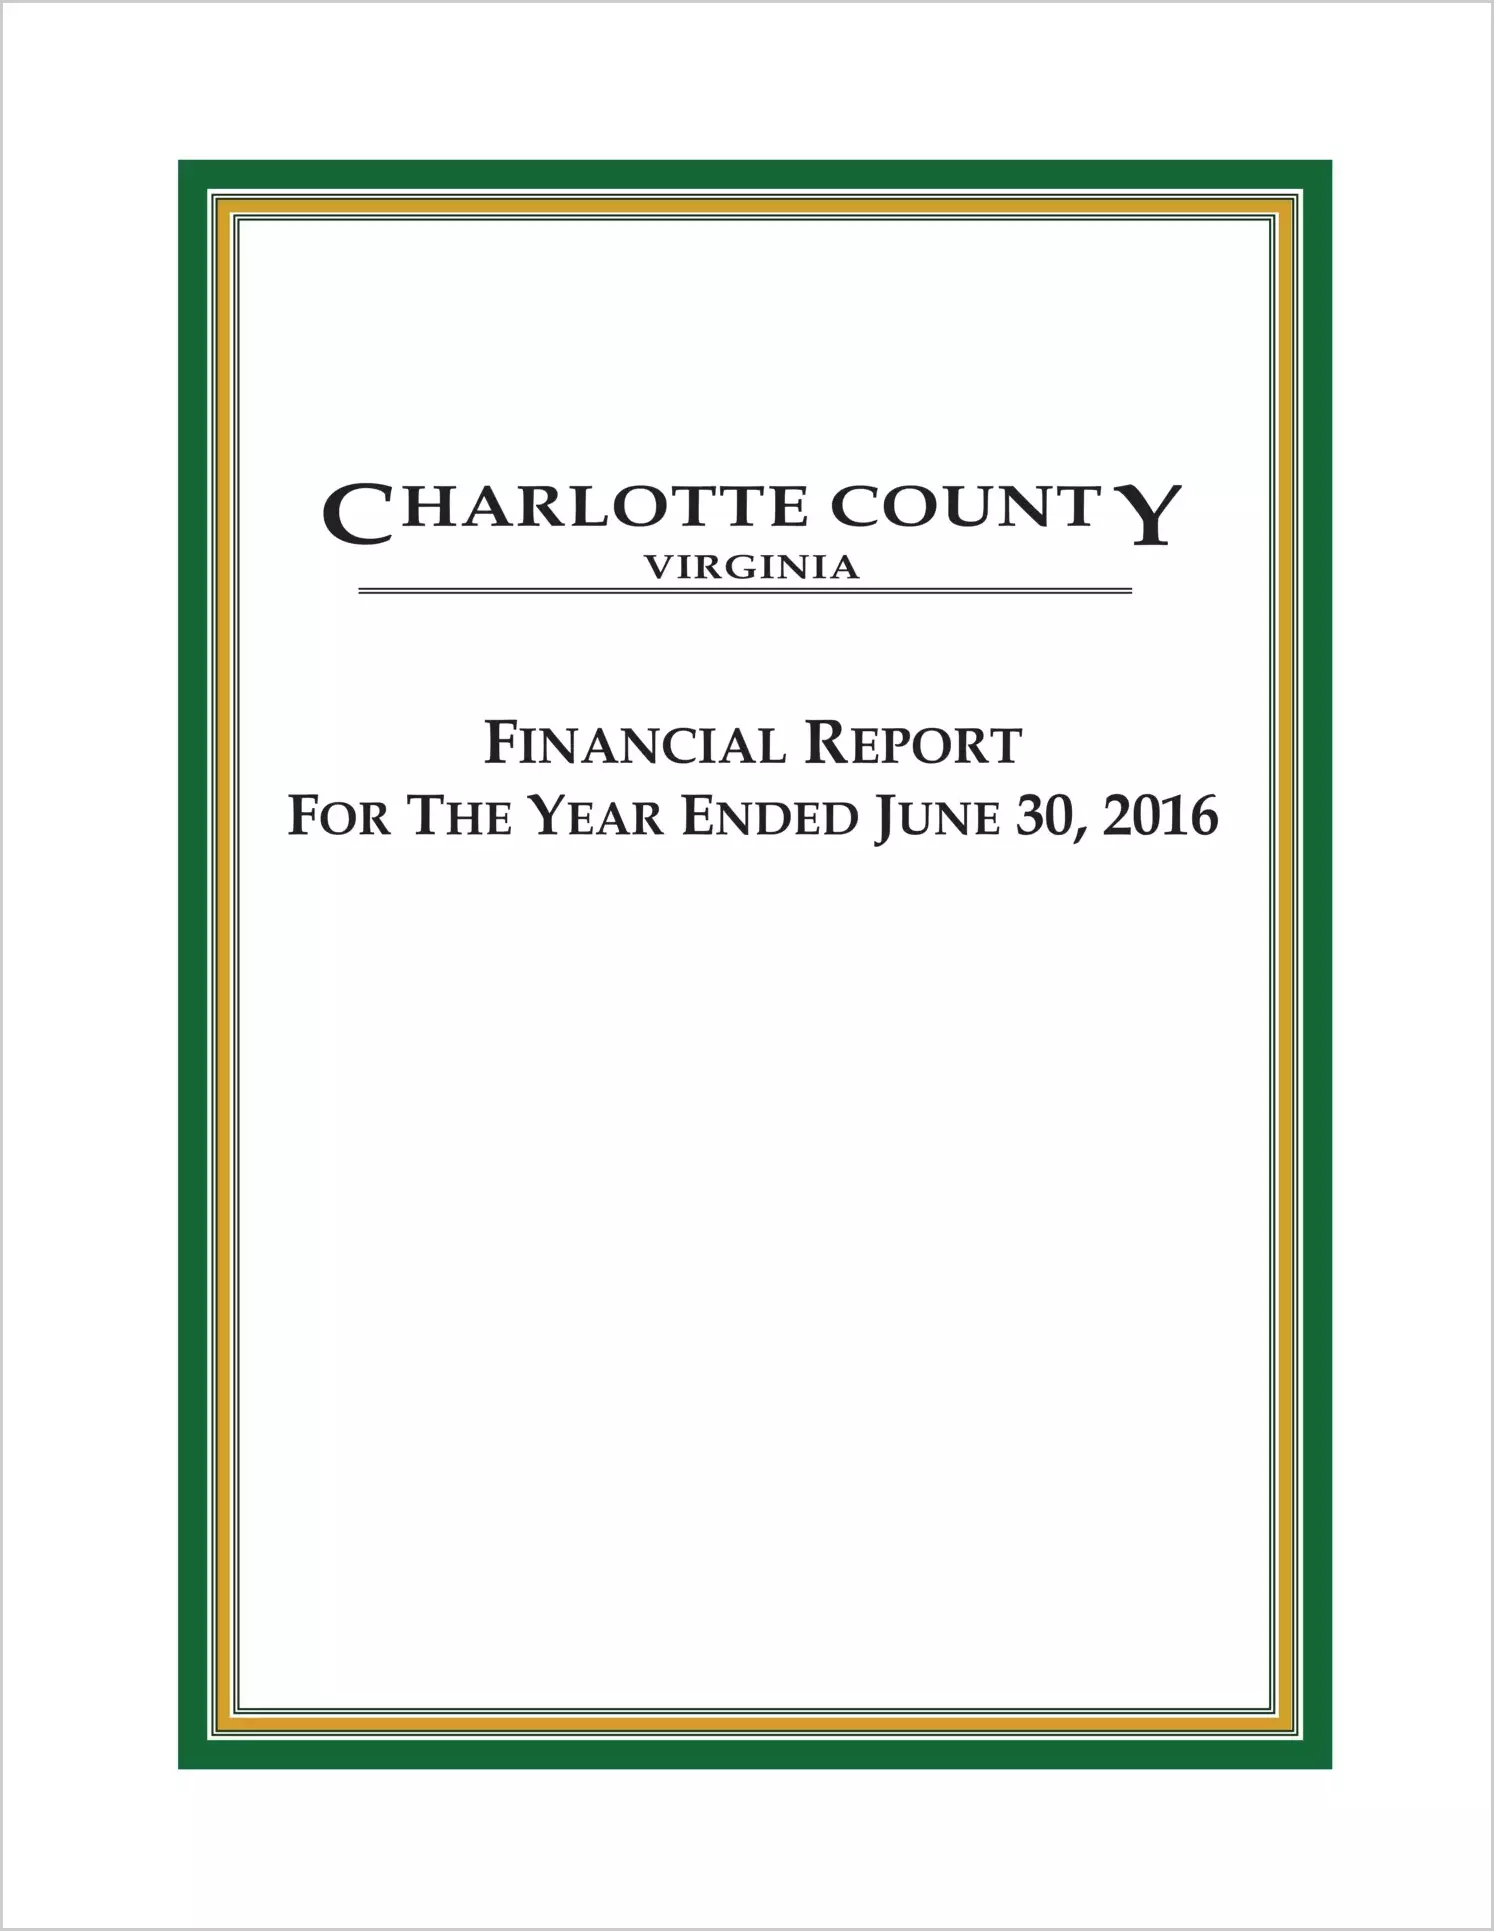 2016 Annual Financial Report for County of Charlotte